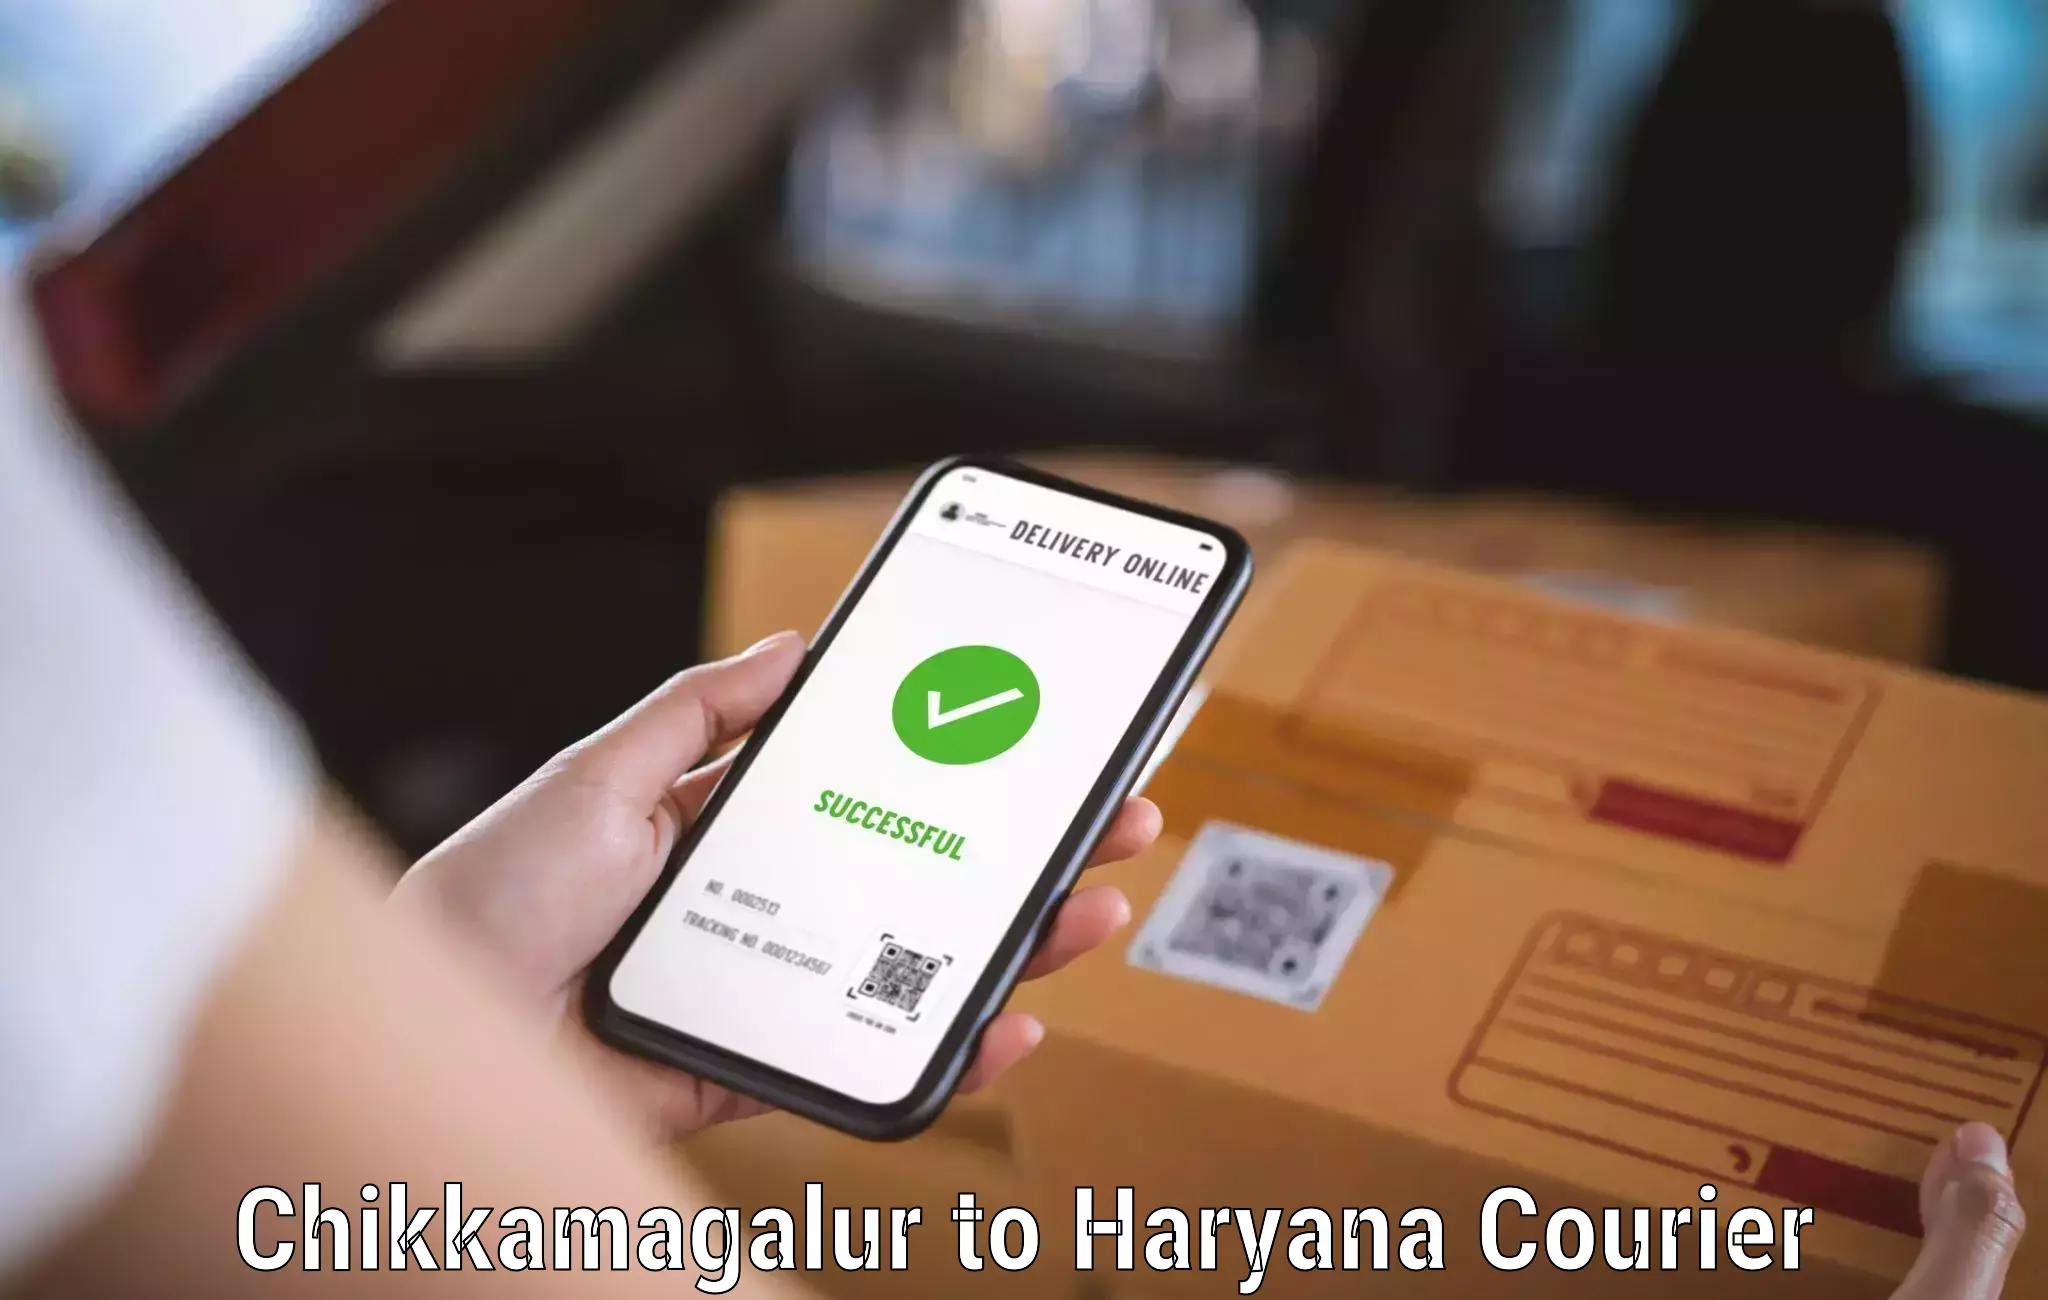 Courier service comparison Chikkamagalur to Karnal